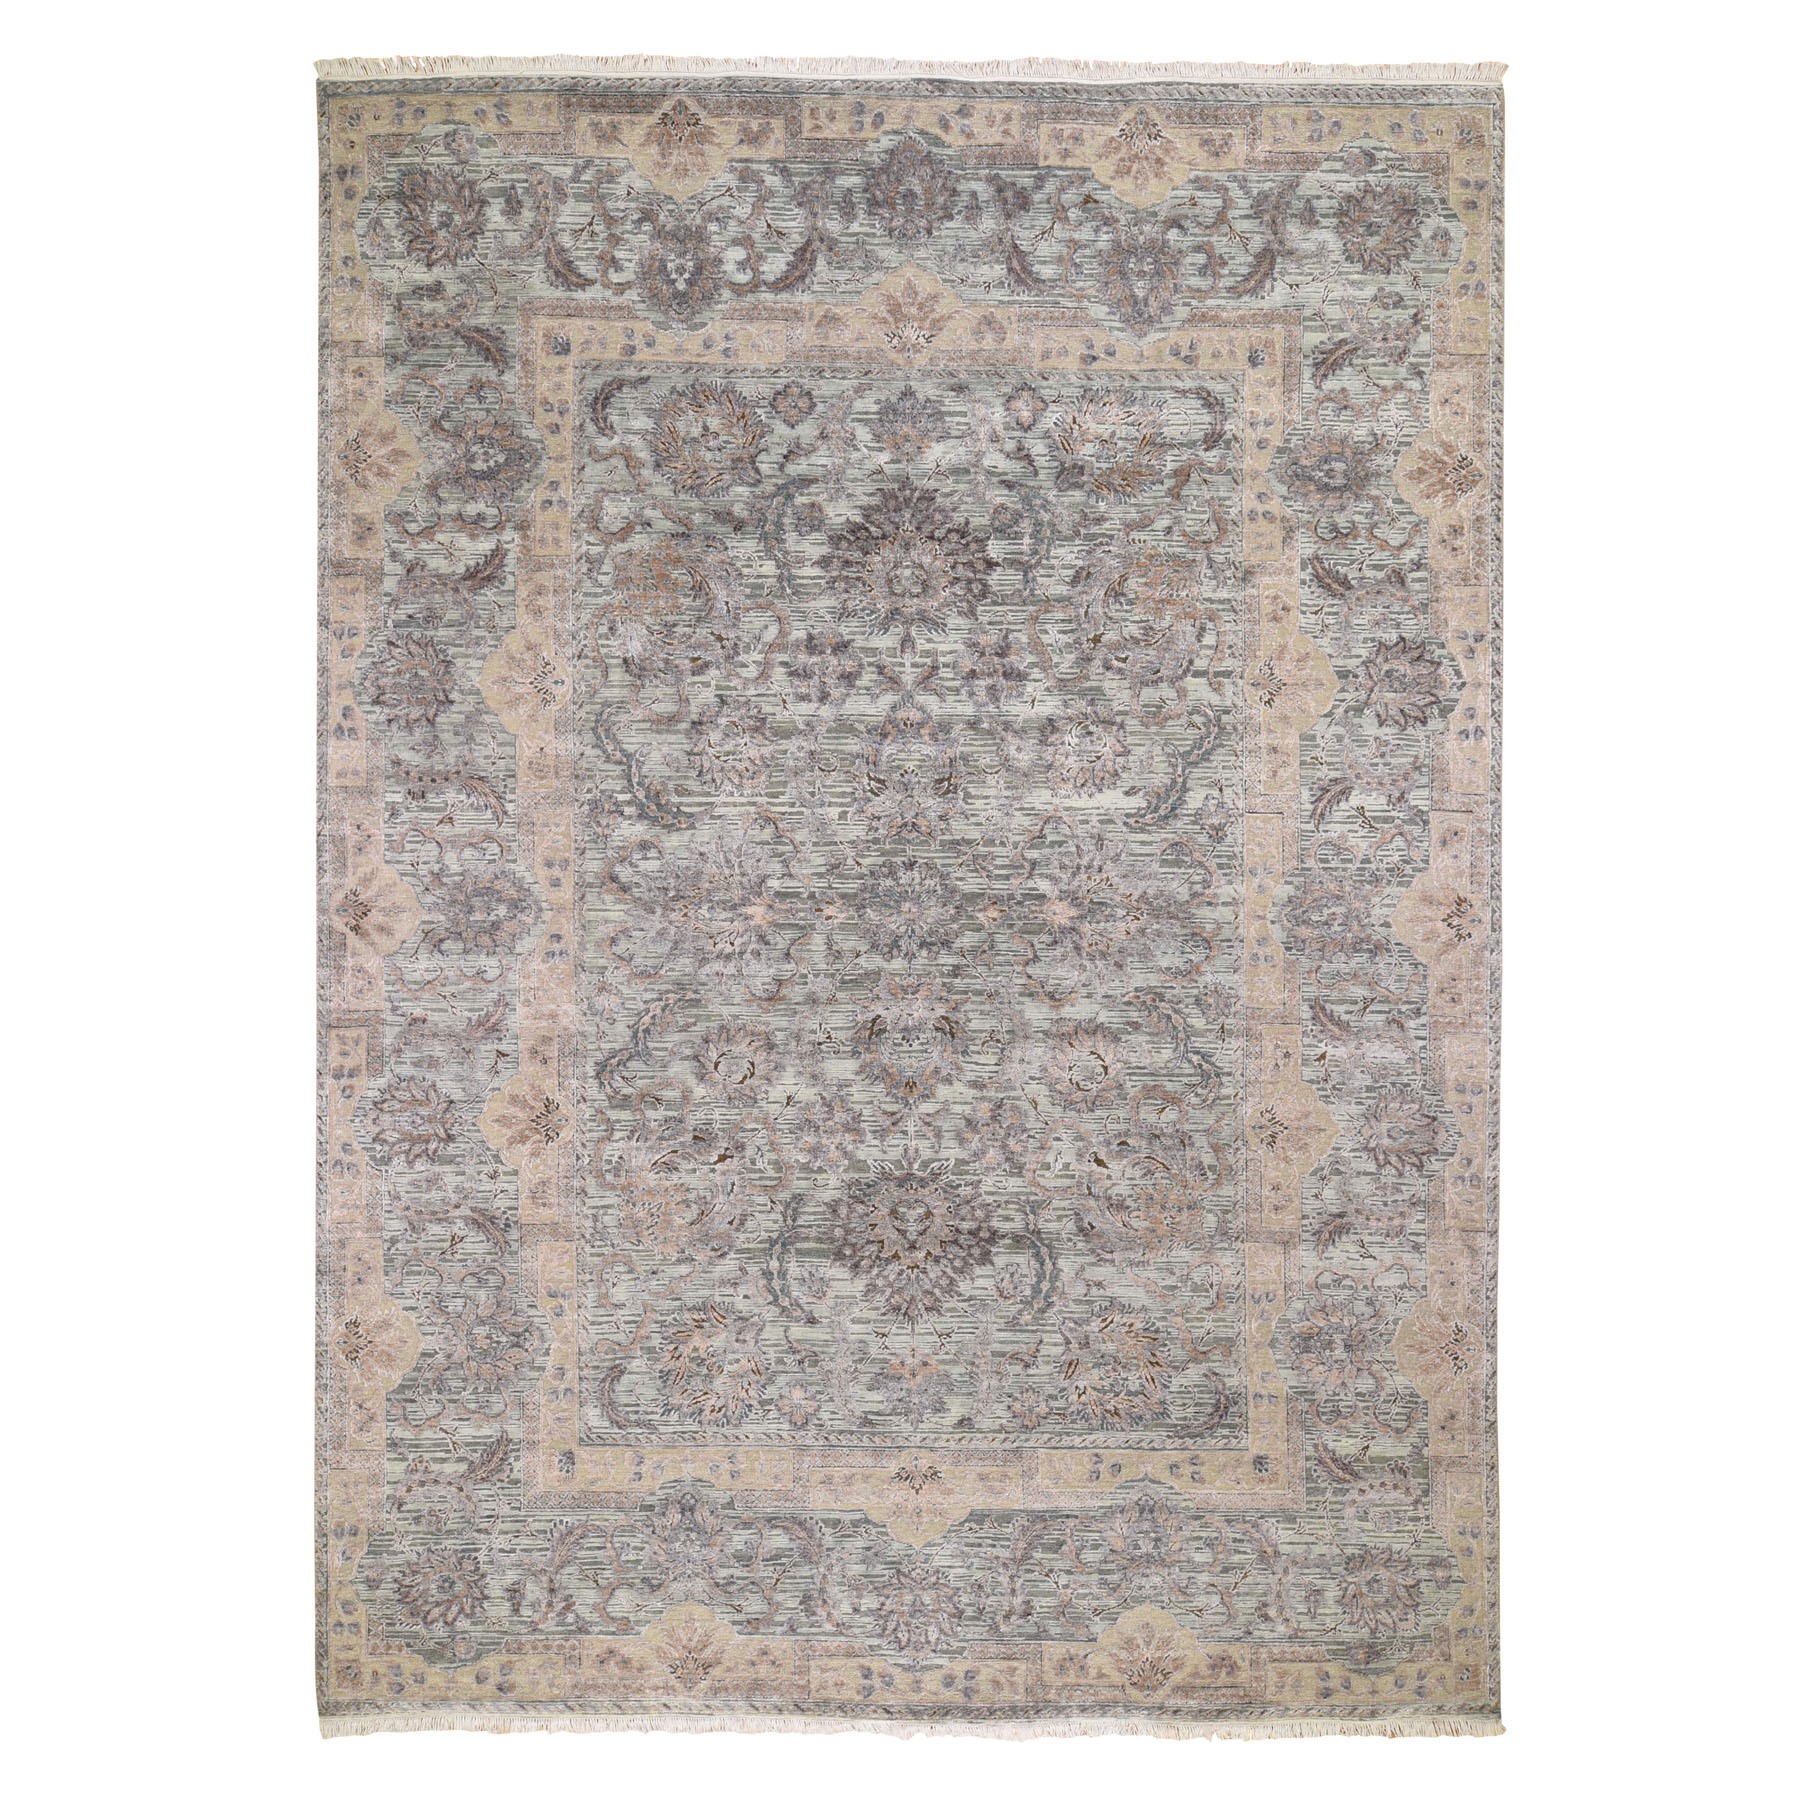 9'X12' Light Green Pure Silk With Textured Wool Mughal Design Hand Knotted Oriental Rug moad8e6c